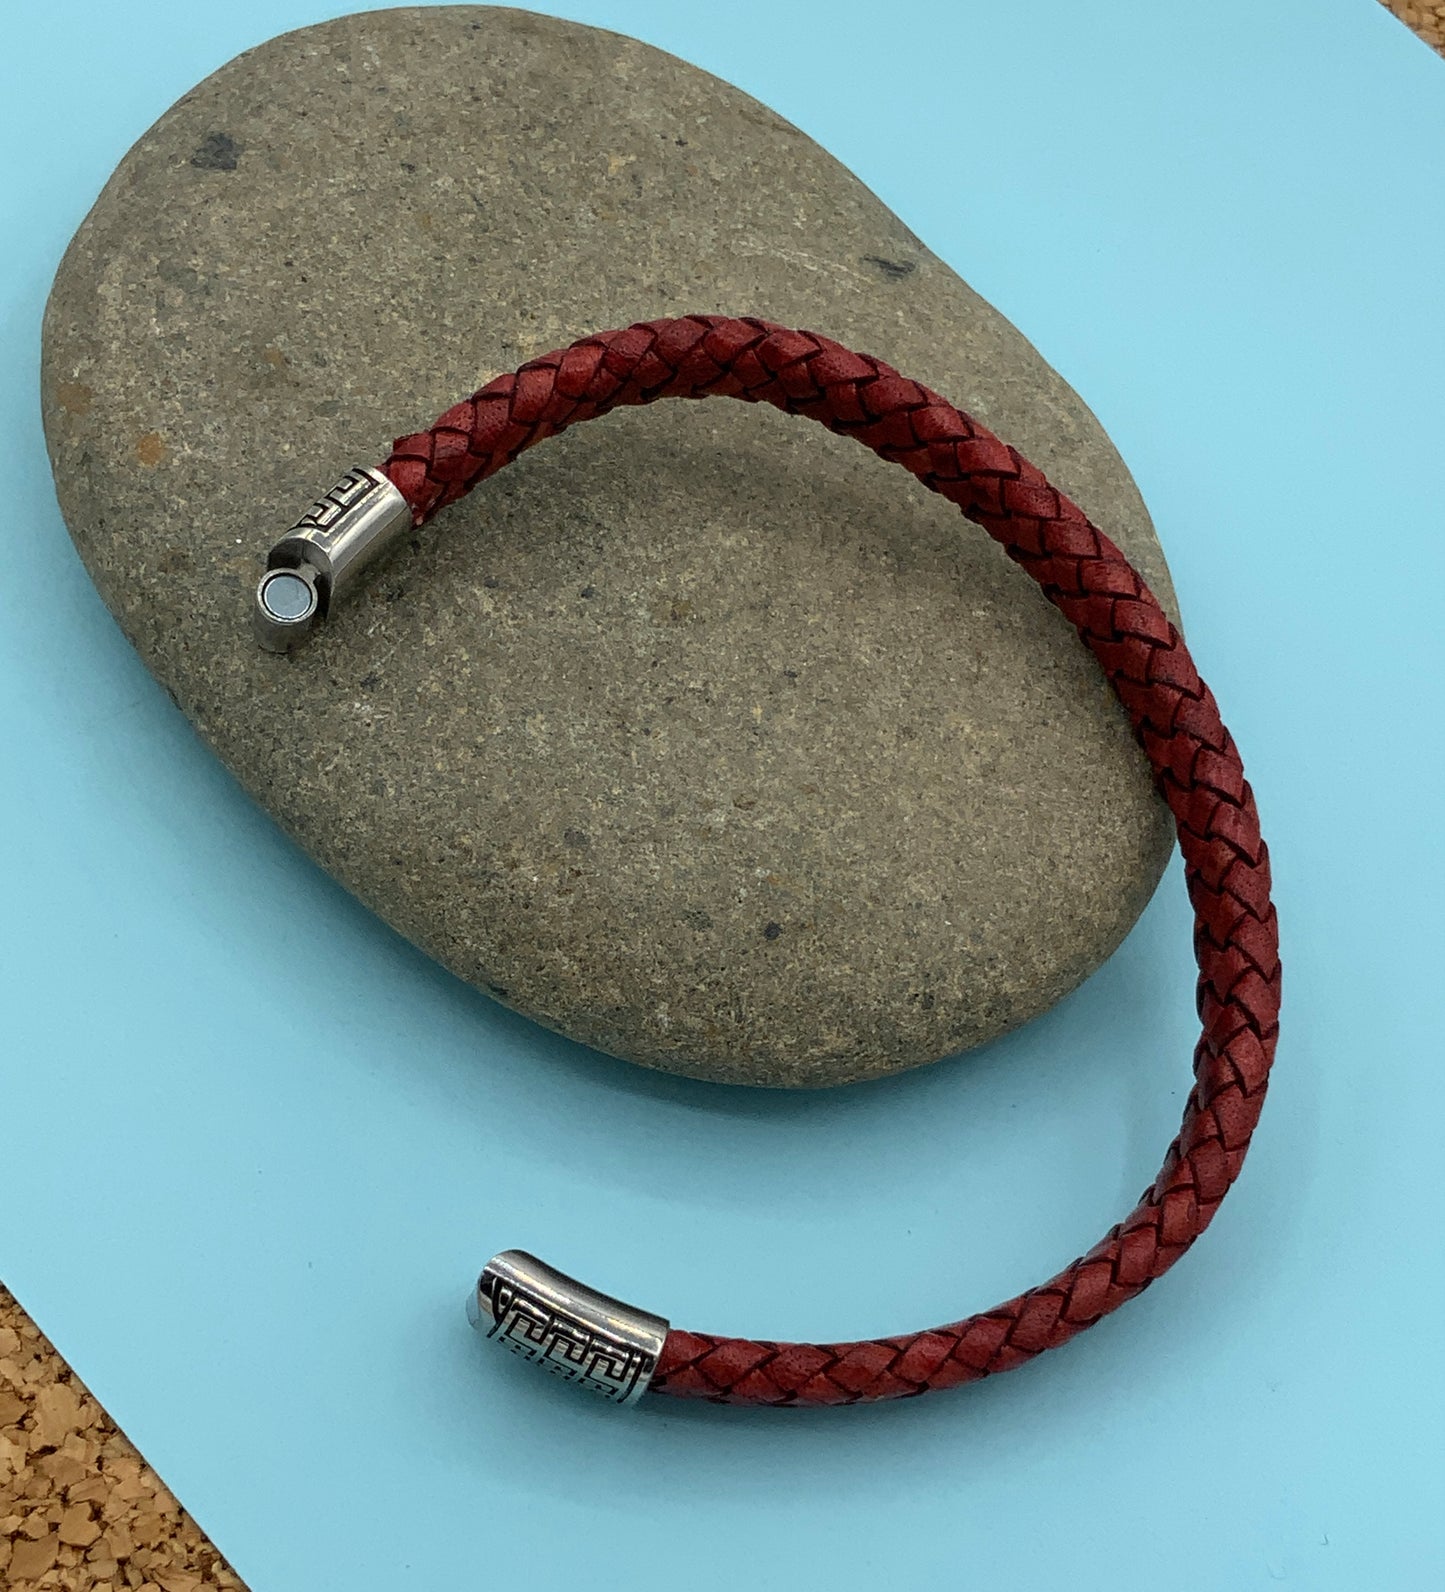 HANDCRAFTED 8MM FLAT BRAIDED LEATHER BRACELET WITH STAINLESS STEEL TRIBAL SLIDE LOCK CLASP